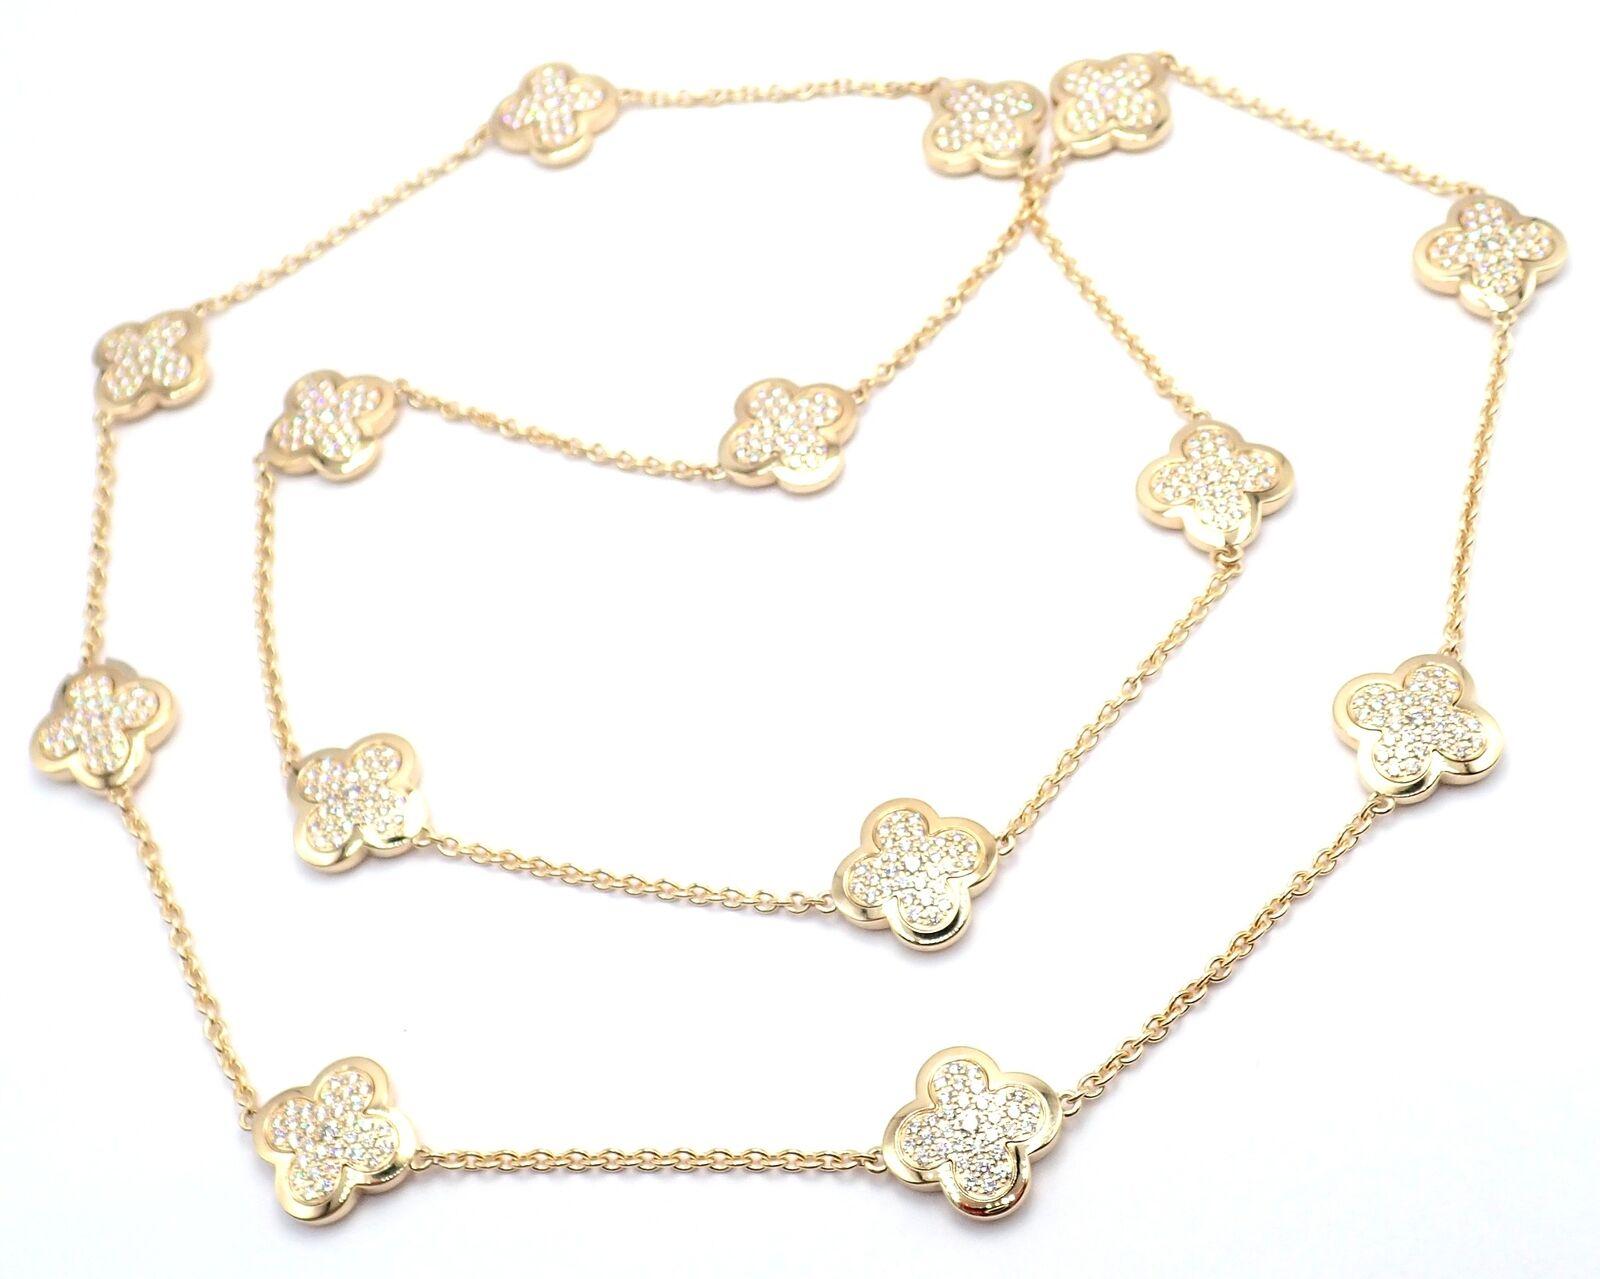 Van Cleef & Arpels Pure Alhambra Fourteen Motifs Diamond Yellow Gold Necklace In Excellent Condition For Sale In Holland, PA